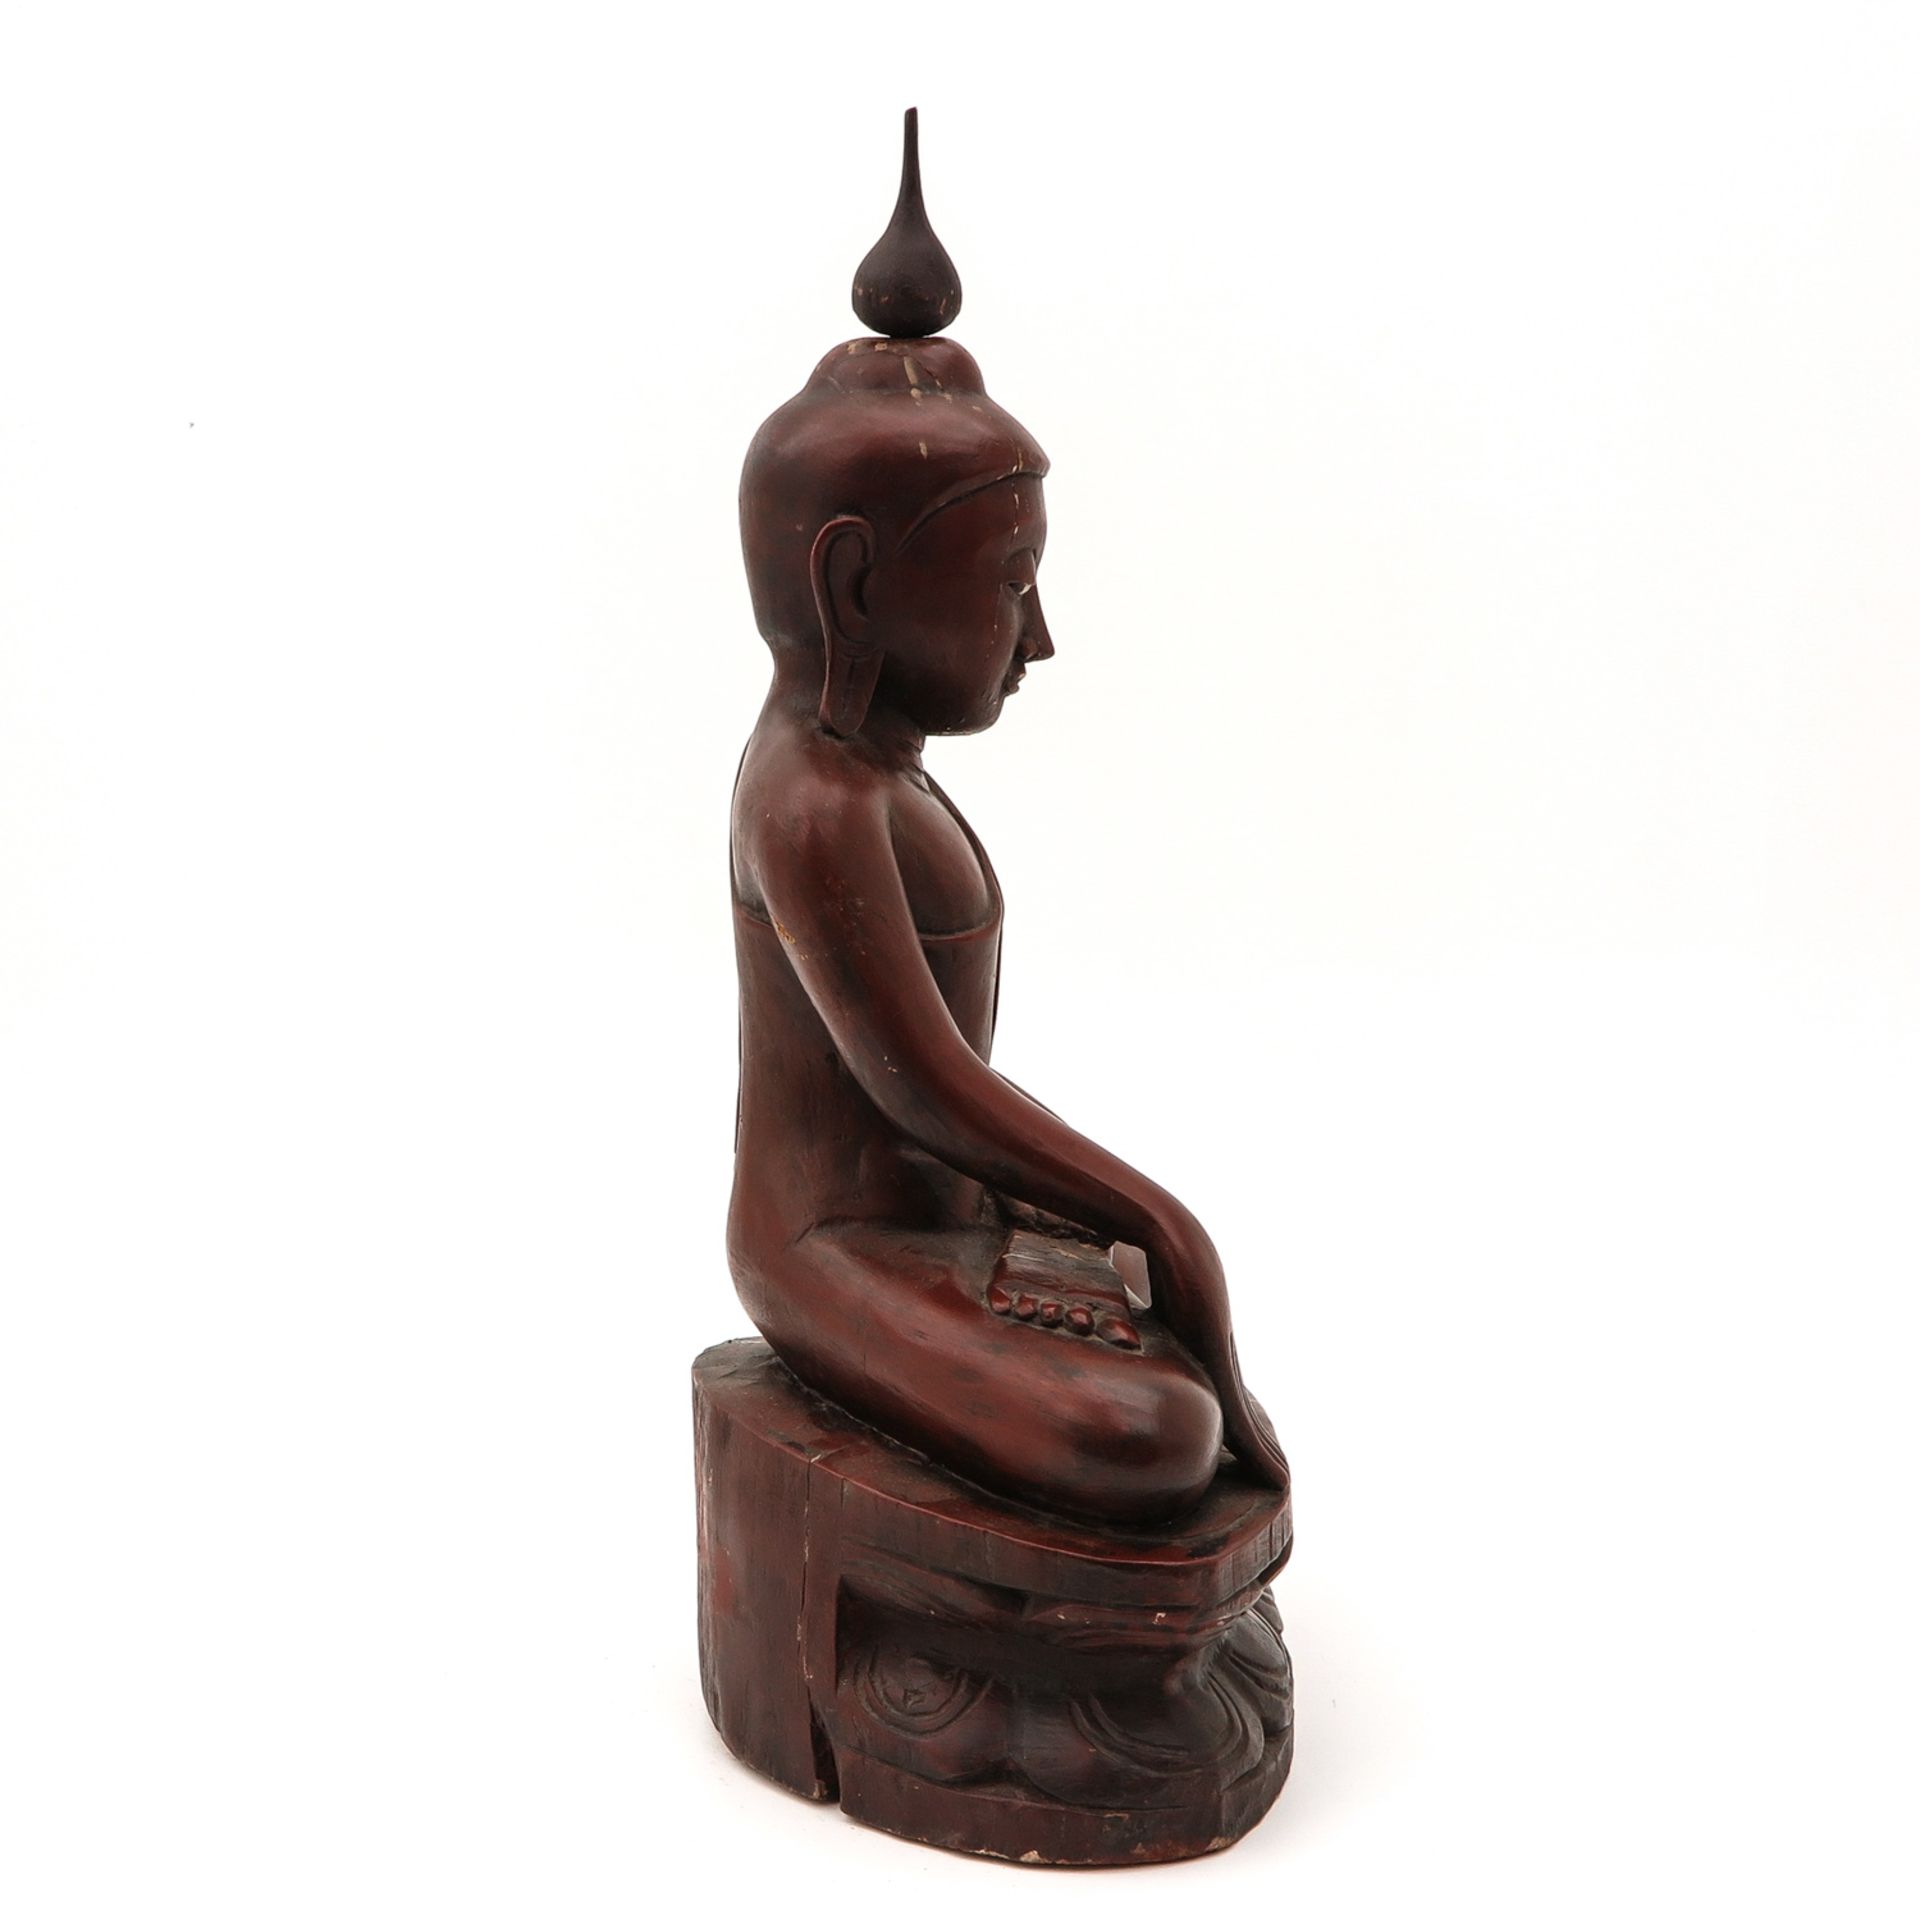 A Carved Wood Buddha Sculpture - Image 4 of 10